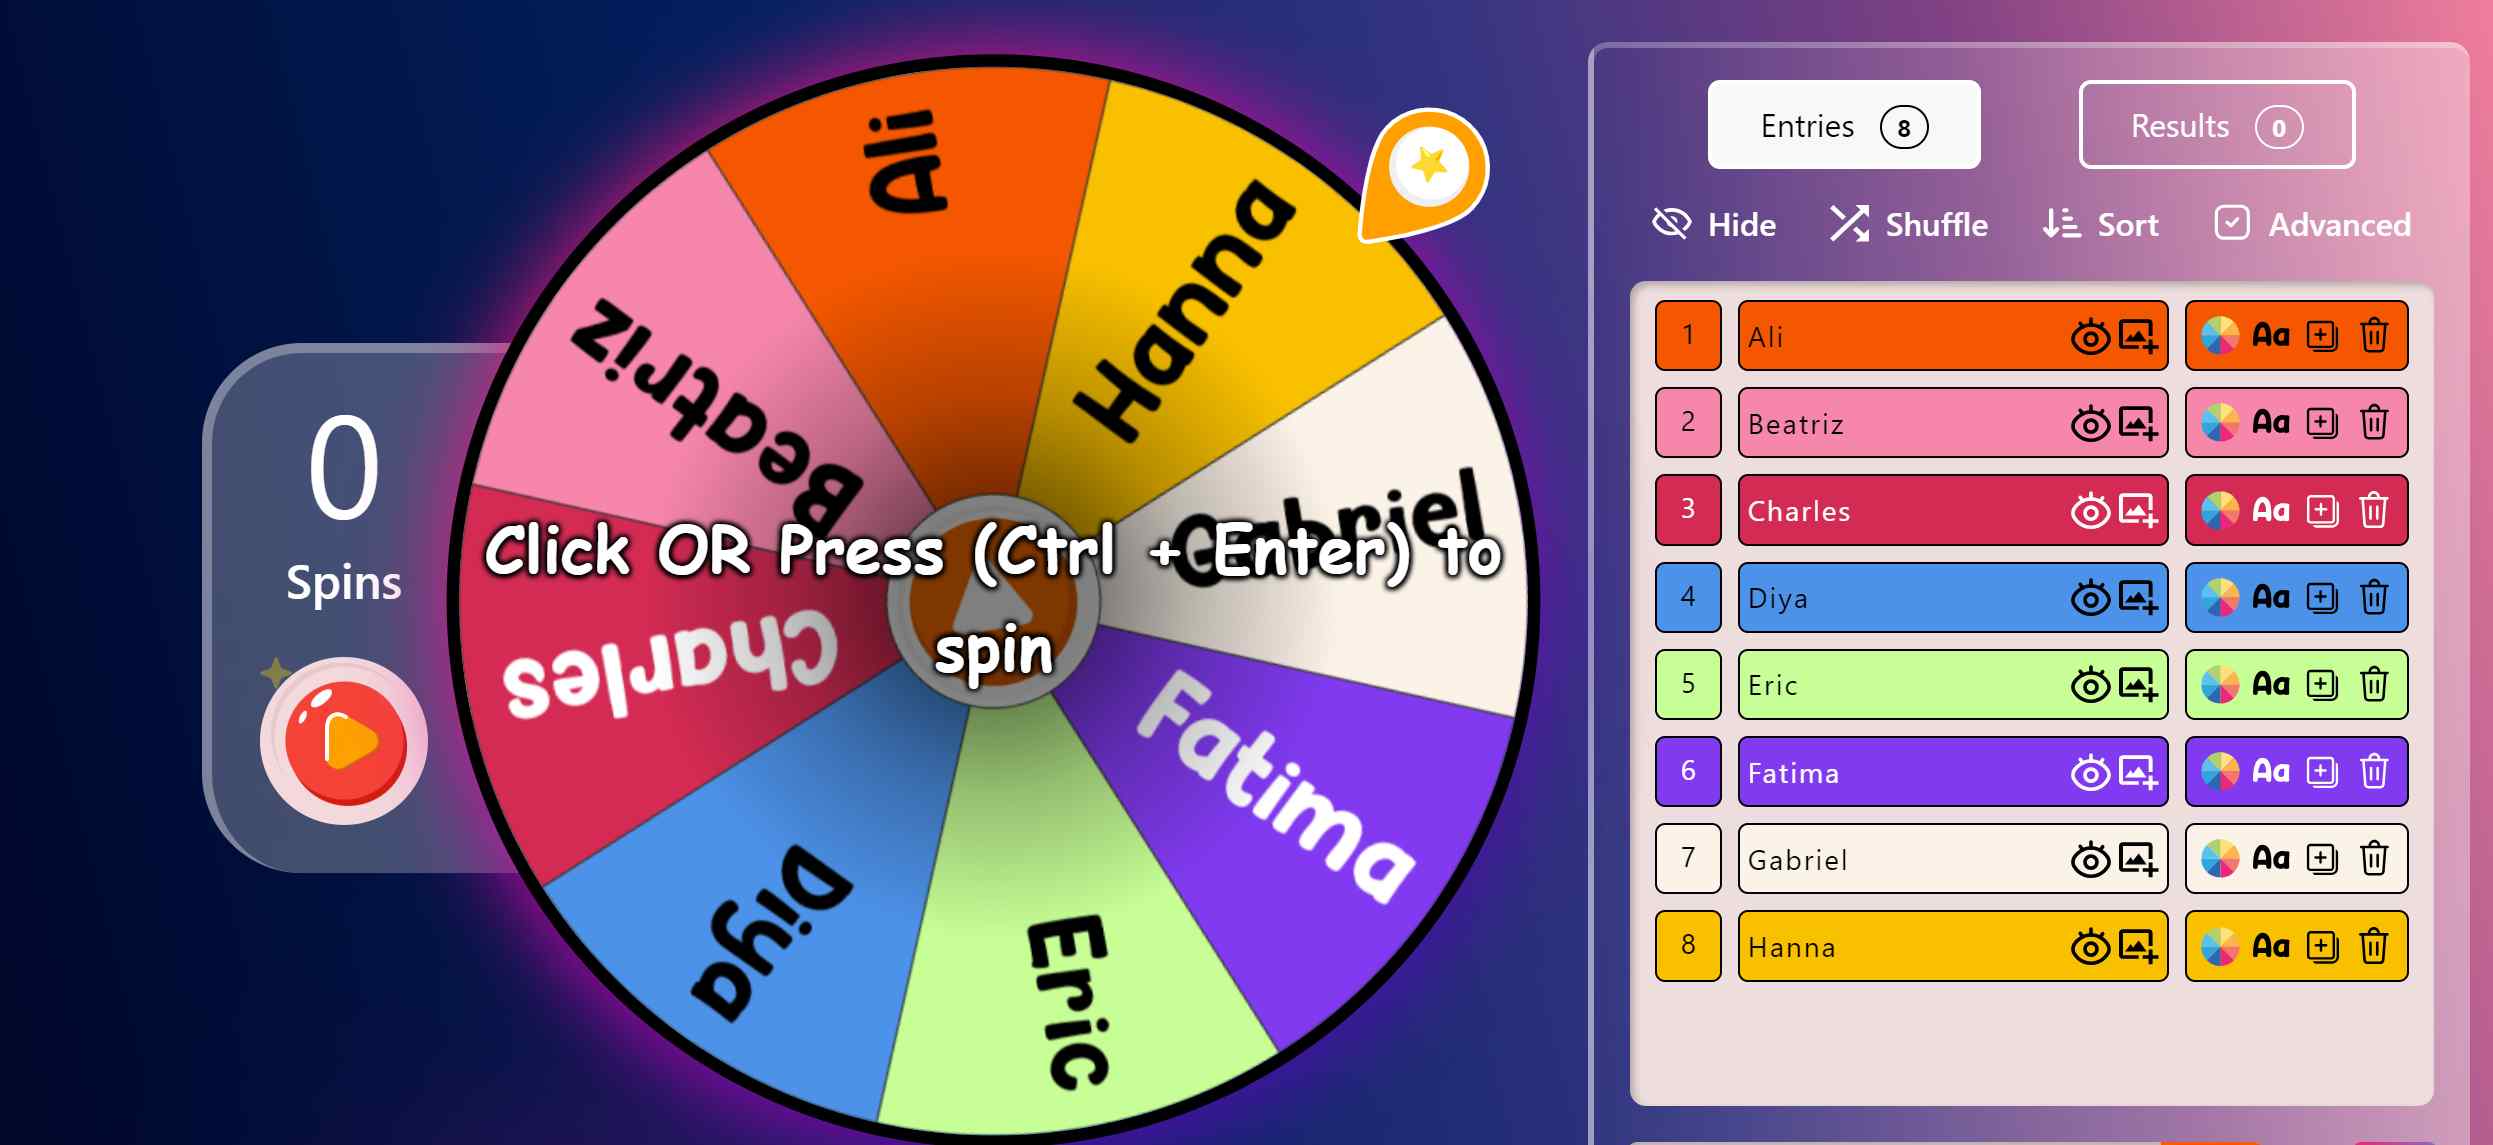 Online Spin Wheel is a great tool for choosing one candidate or option for an extensive range of class and educational activities like selecting winners, initiating conversation, drama play, telling stories, games, and other fun affairs. 